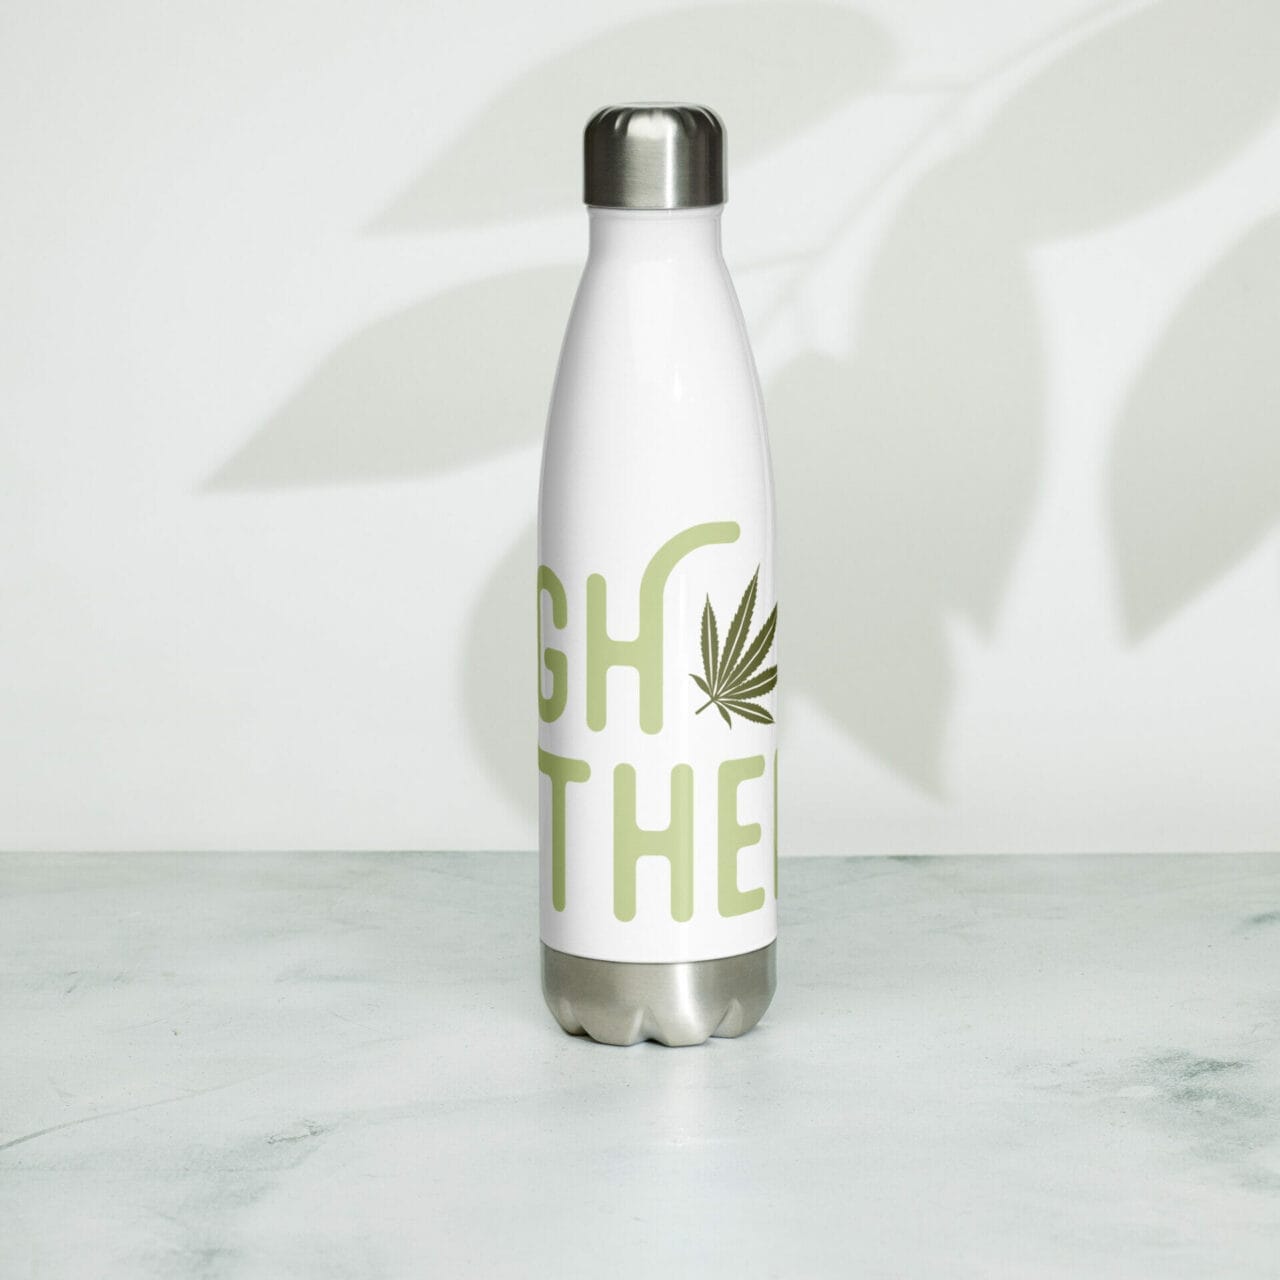 GHC "High There" Stainless Steel Water Bottle